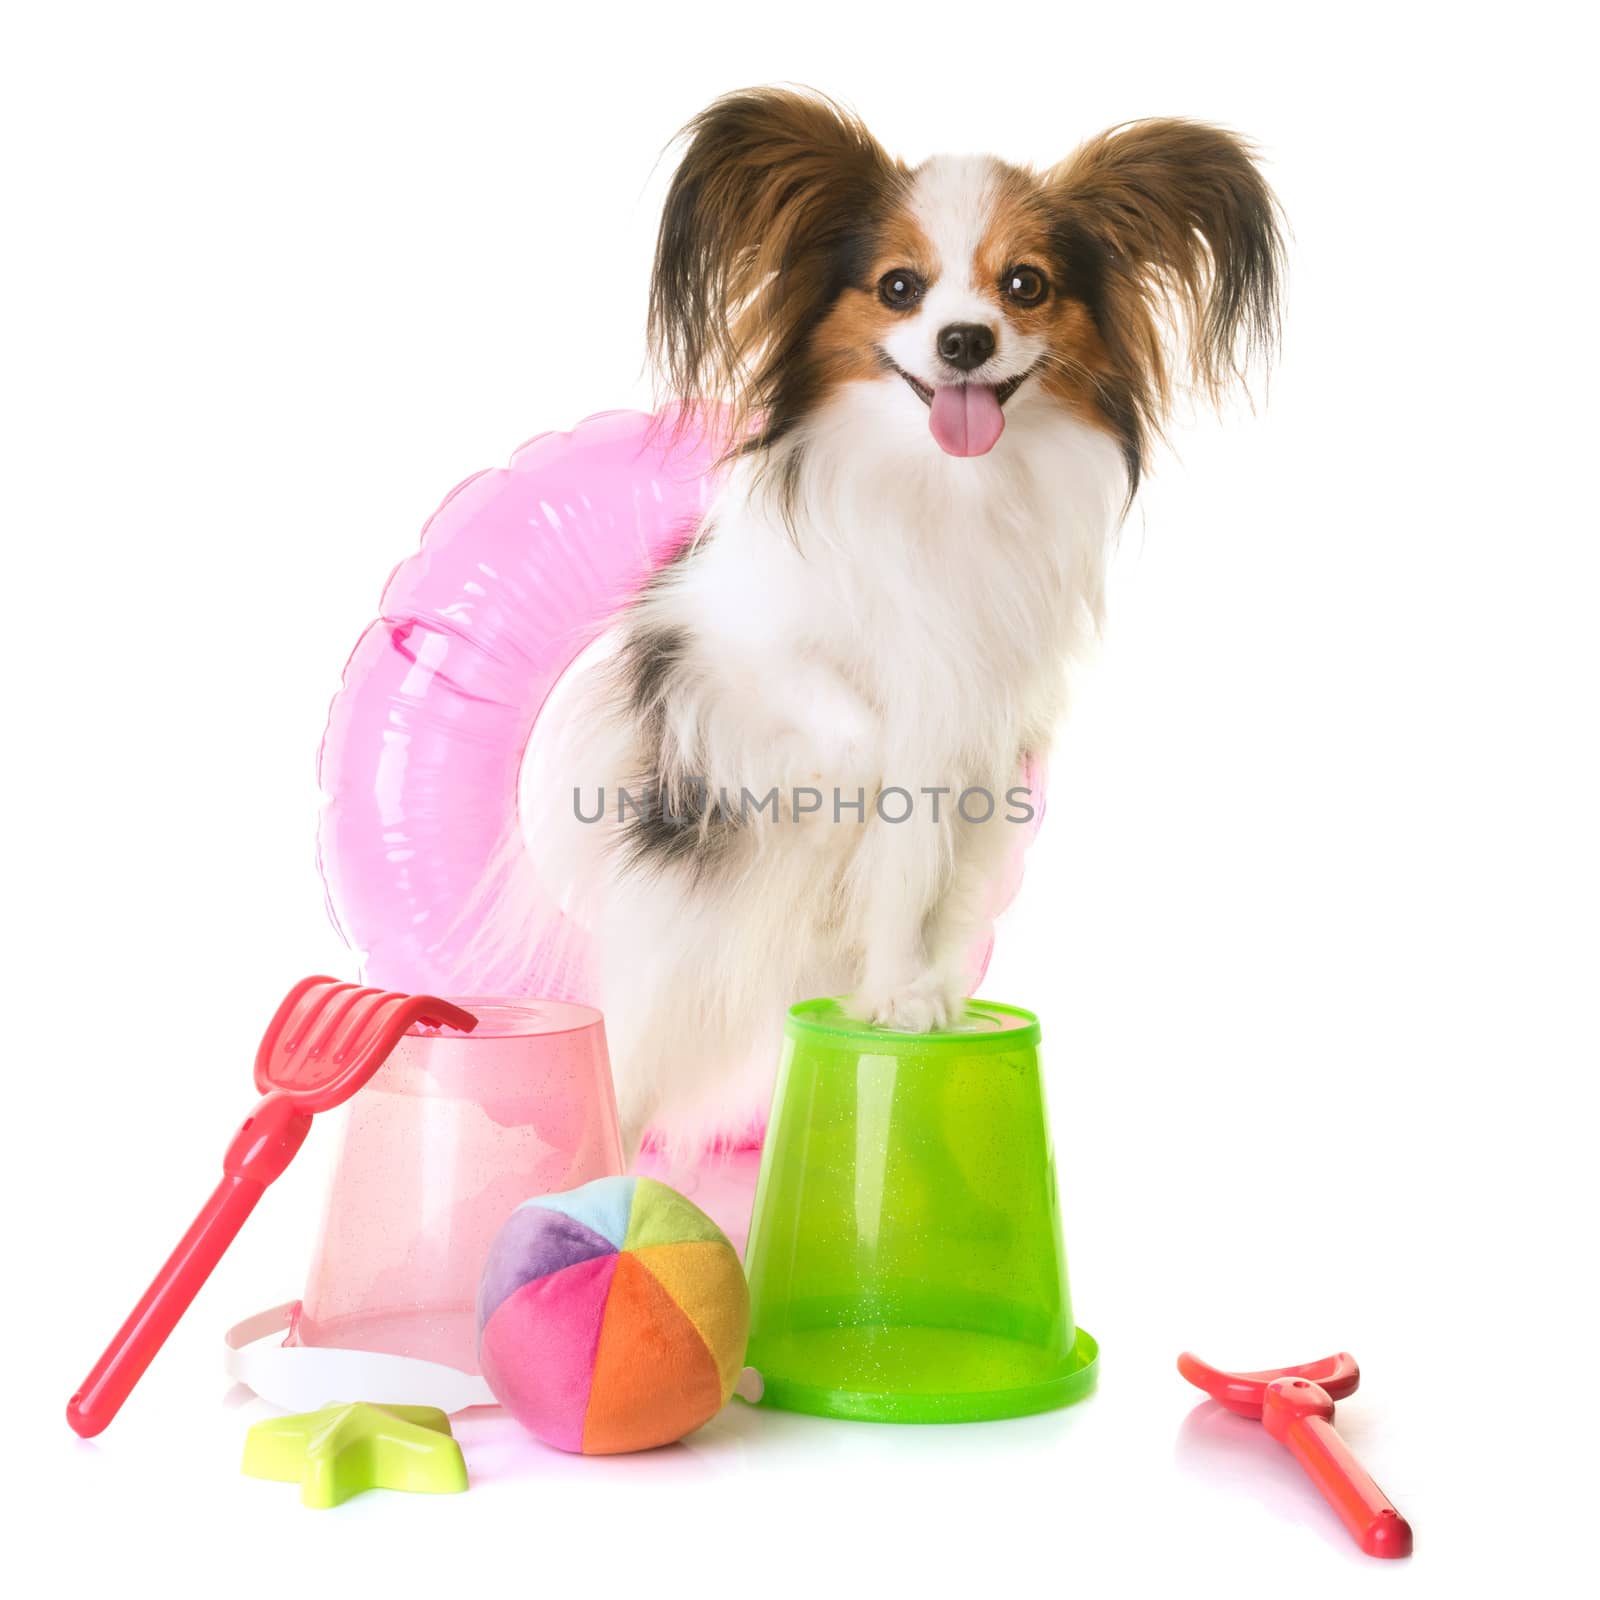 papillon dog in holiday in front of white background